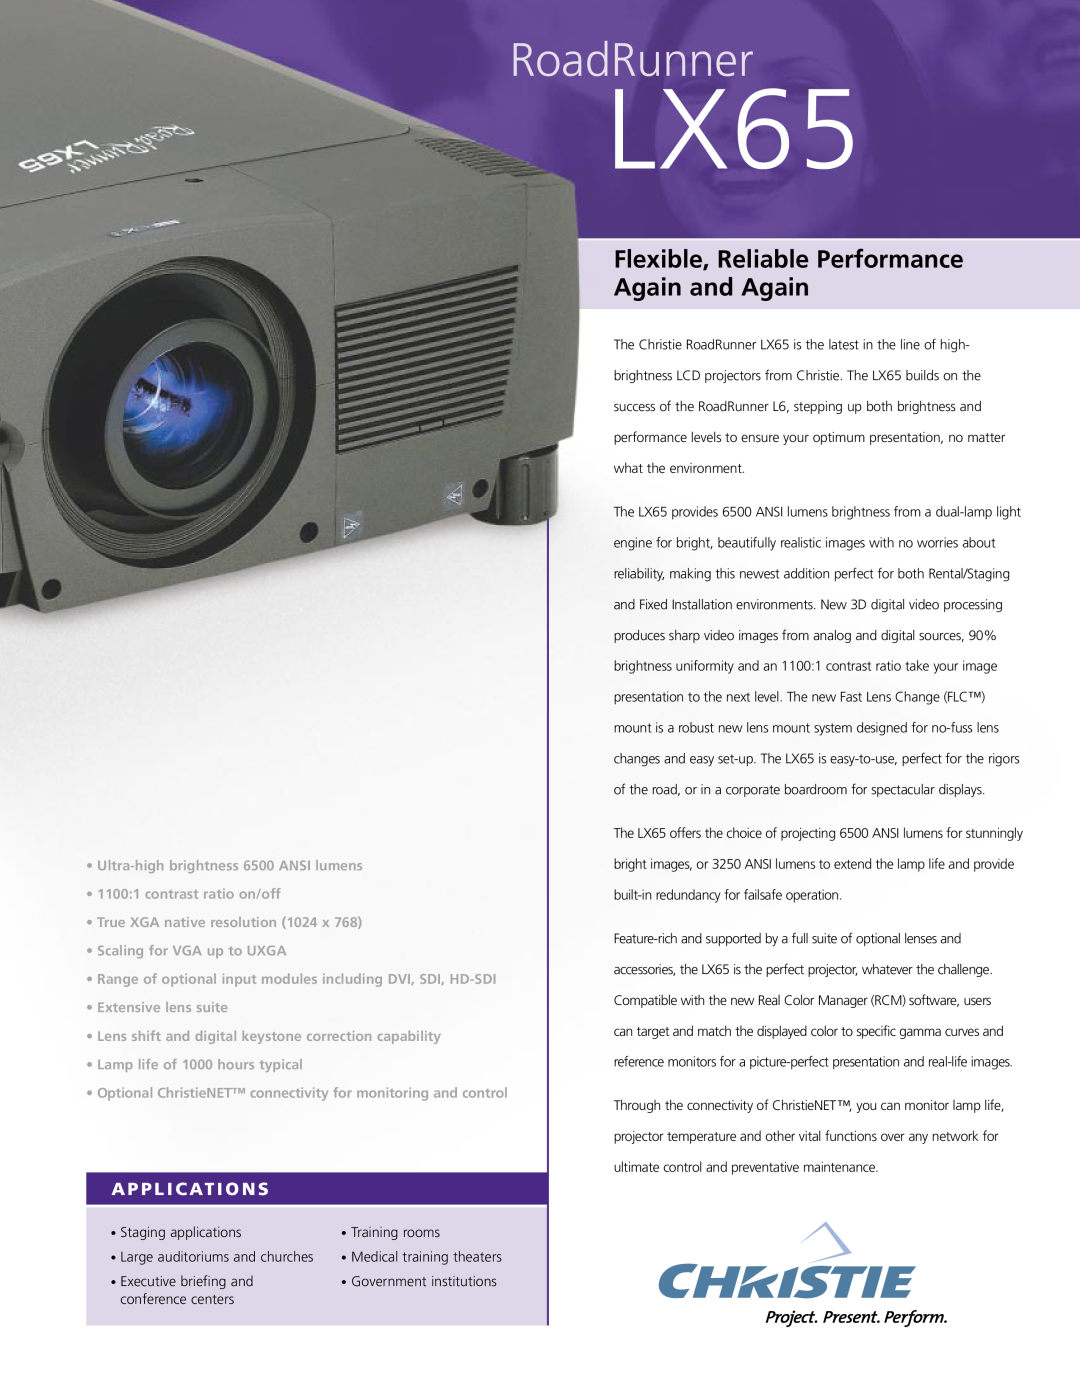 Christie Digital Systems LX65 manual A P P L I C At I O N S, RoadRunner, Flexible, Reliable Performance Again and Again 